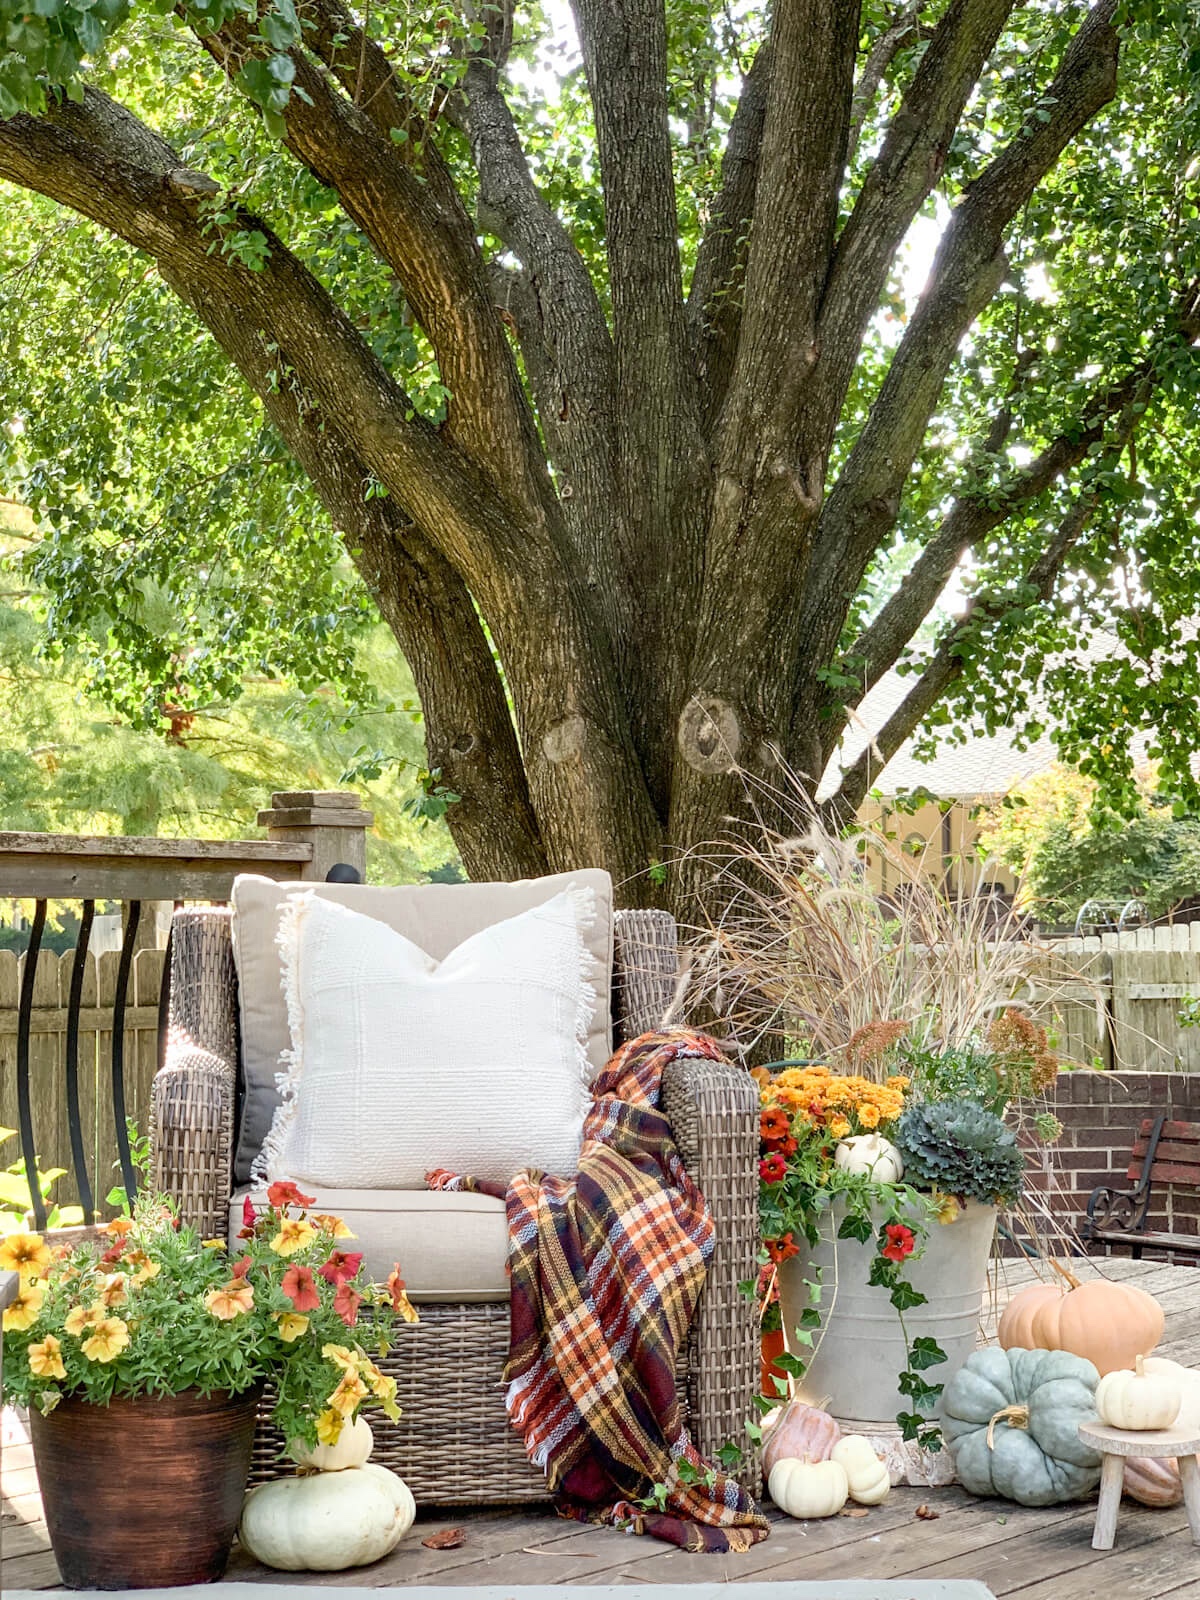 A fall-toned plaid throw graces an outdoor wicker chair. The chair is next to a fall container with live plants. A pot of petunias sits in front next to a pumpkin stack.